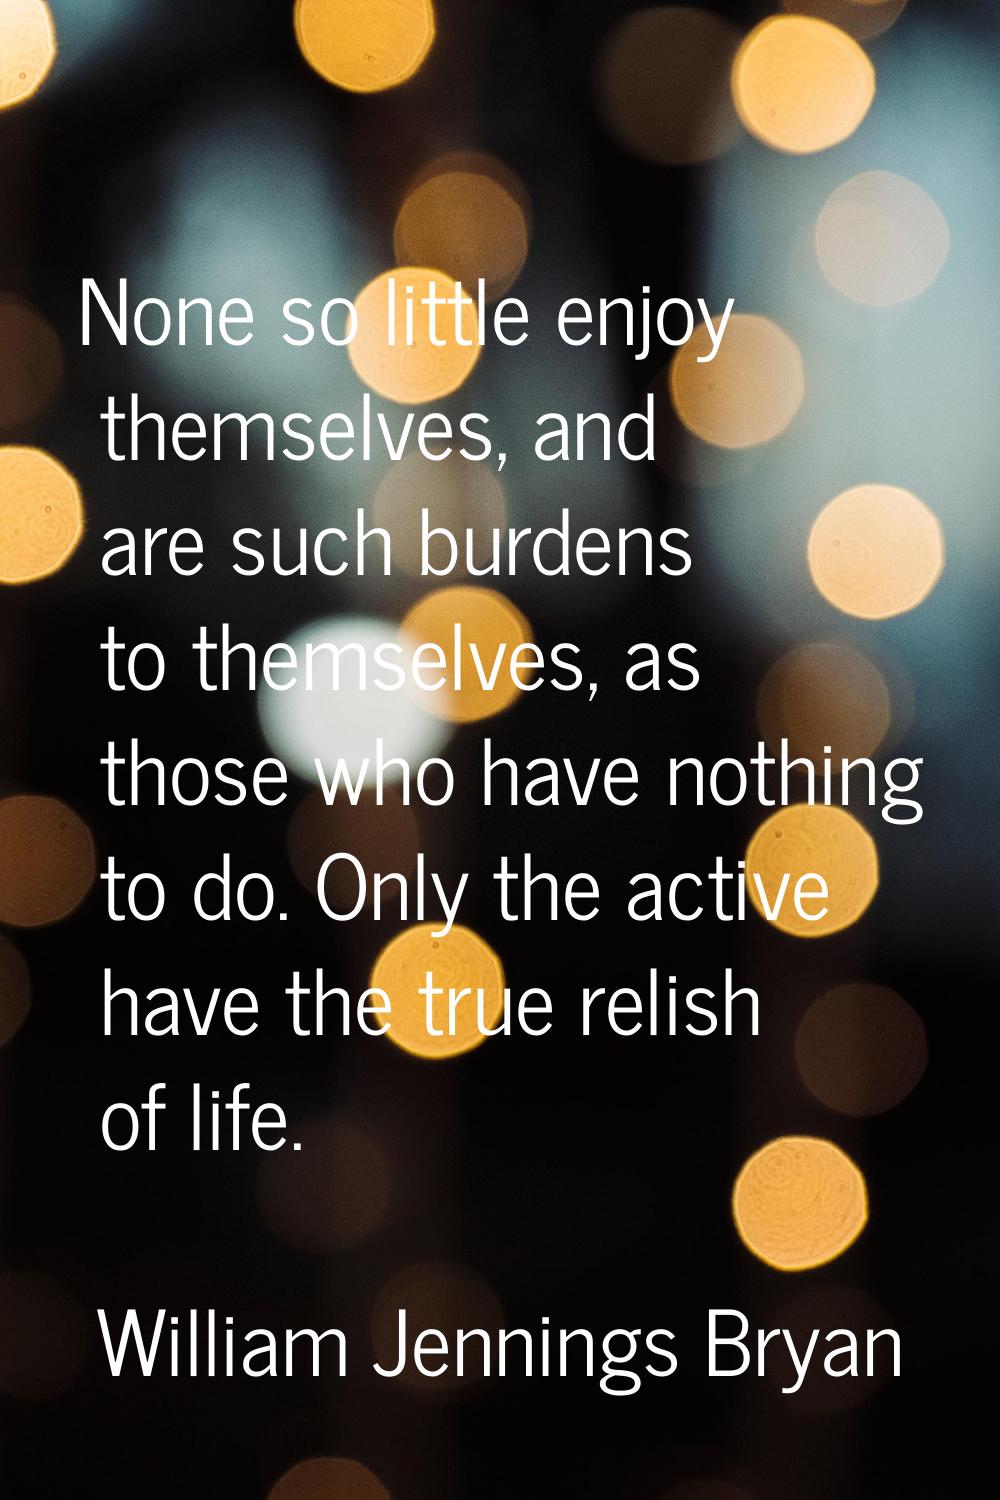 None so little enjoy themselves, and are such burdens to themselves, as those who have nothing to d